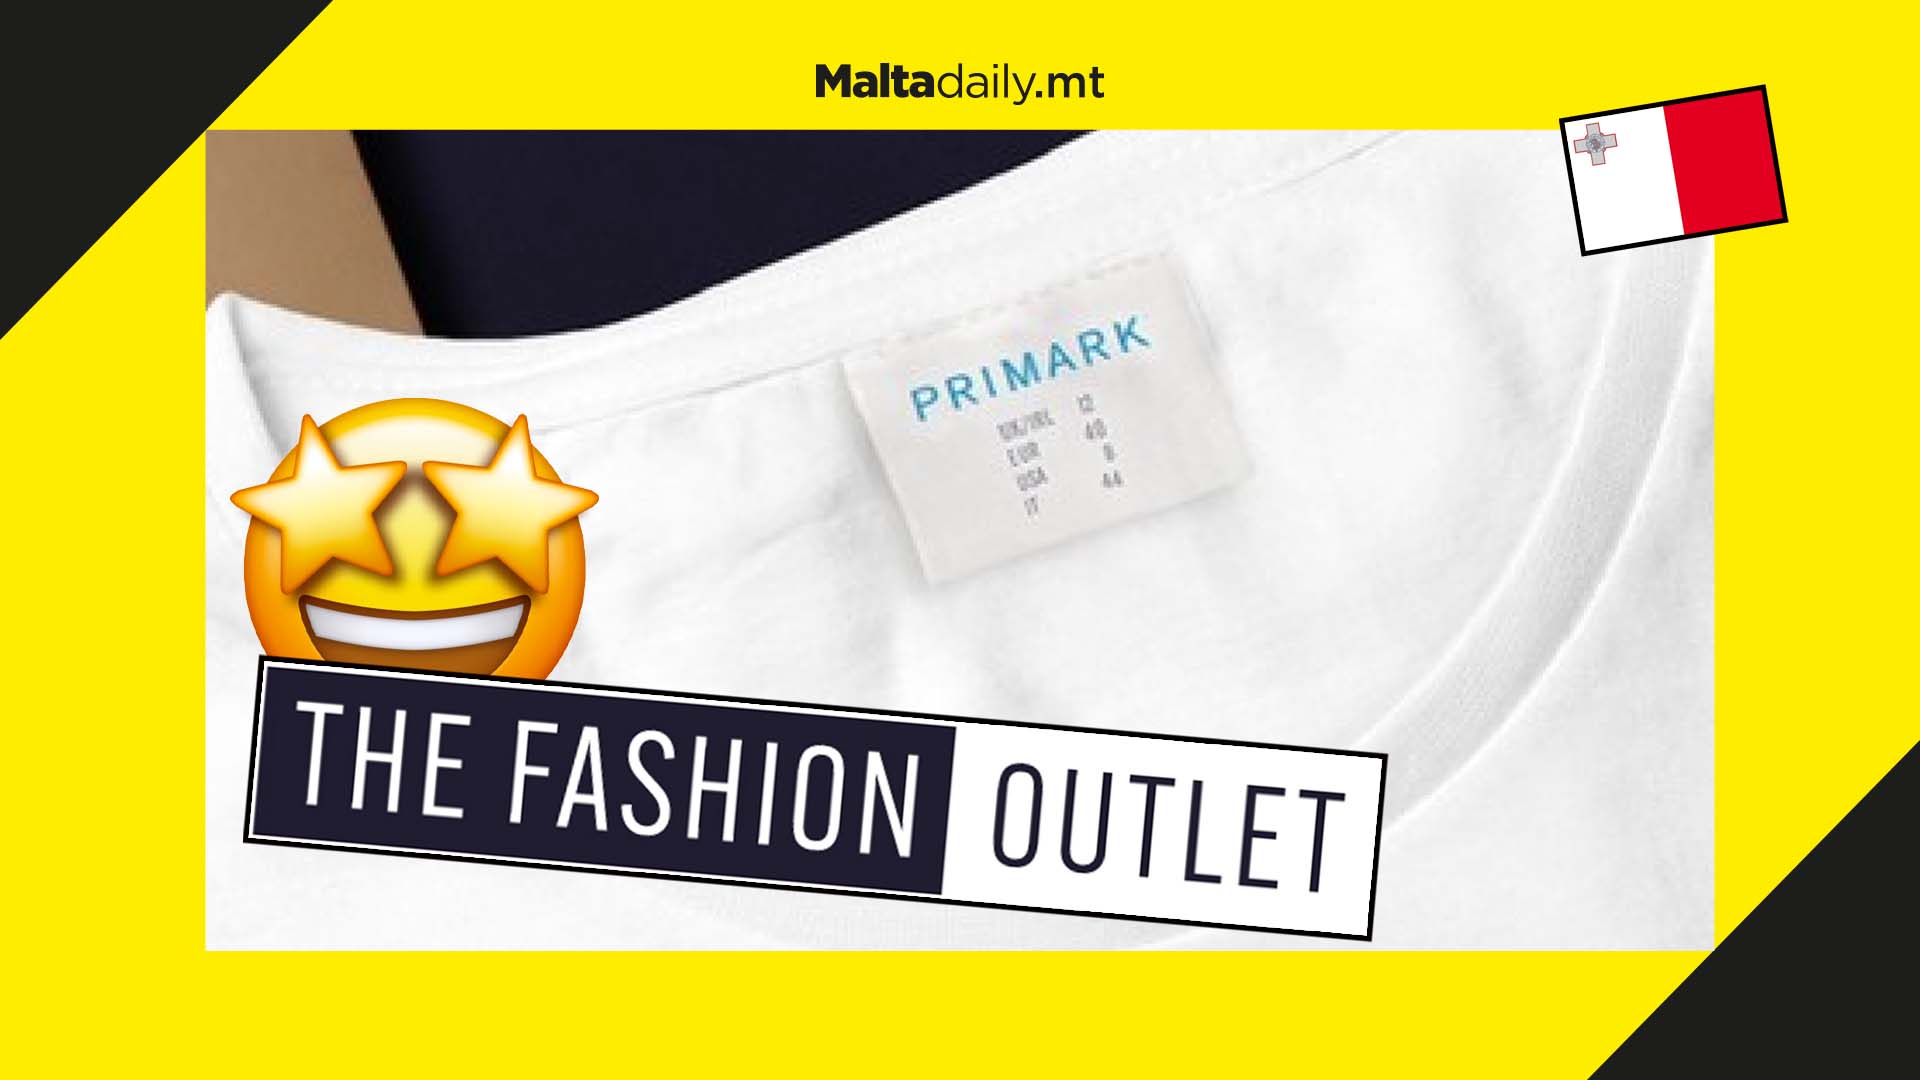 Primark has made it’s way to Malta right on time for Christmas!